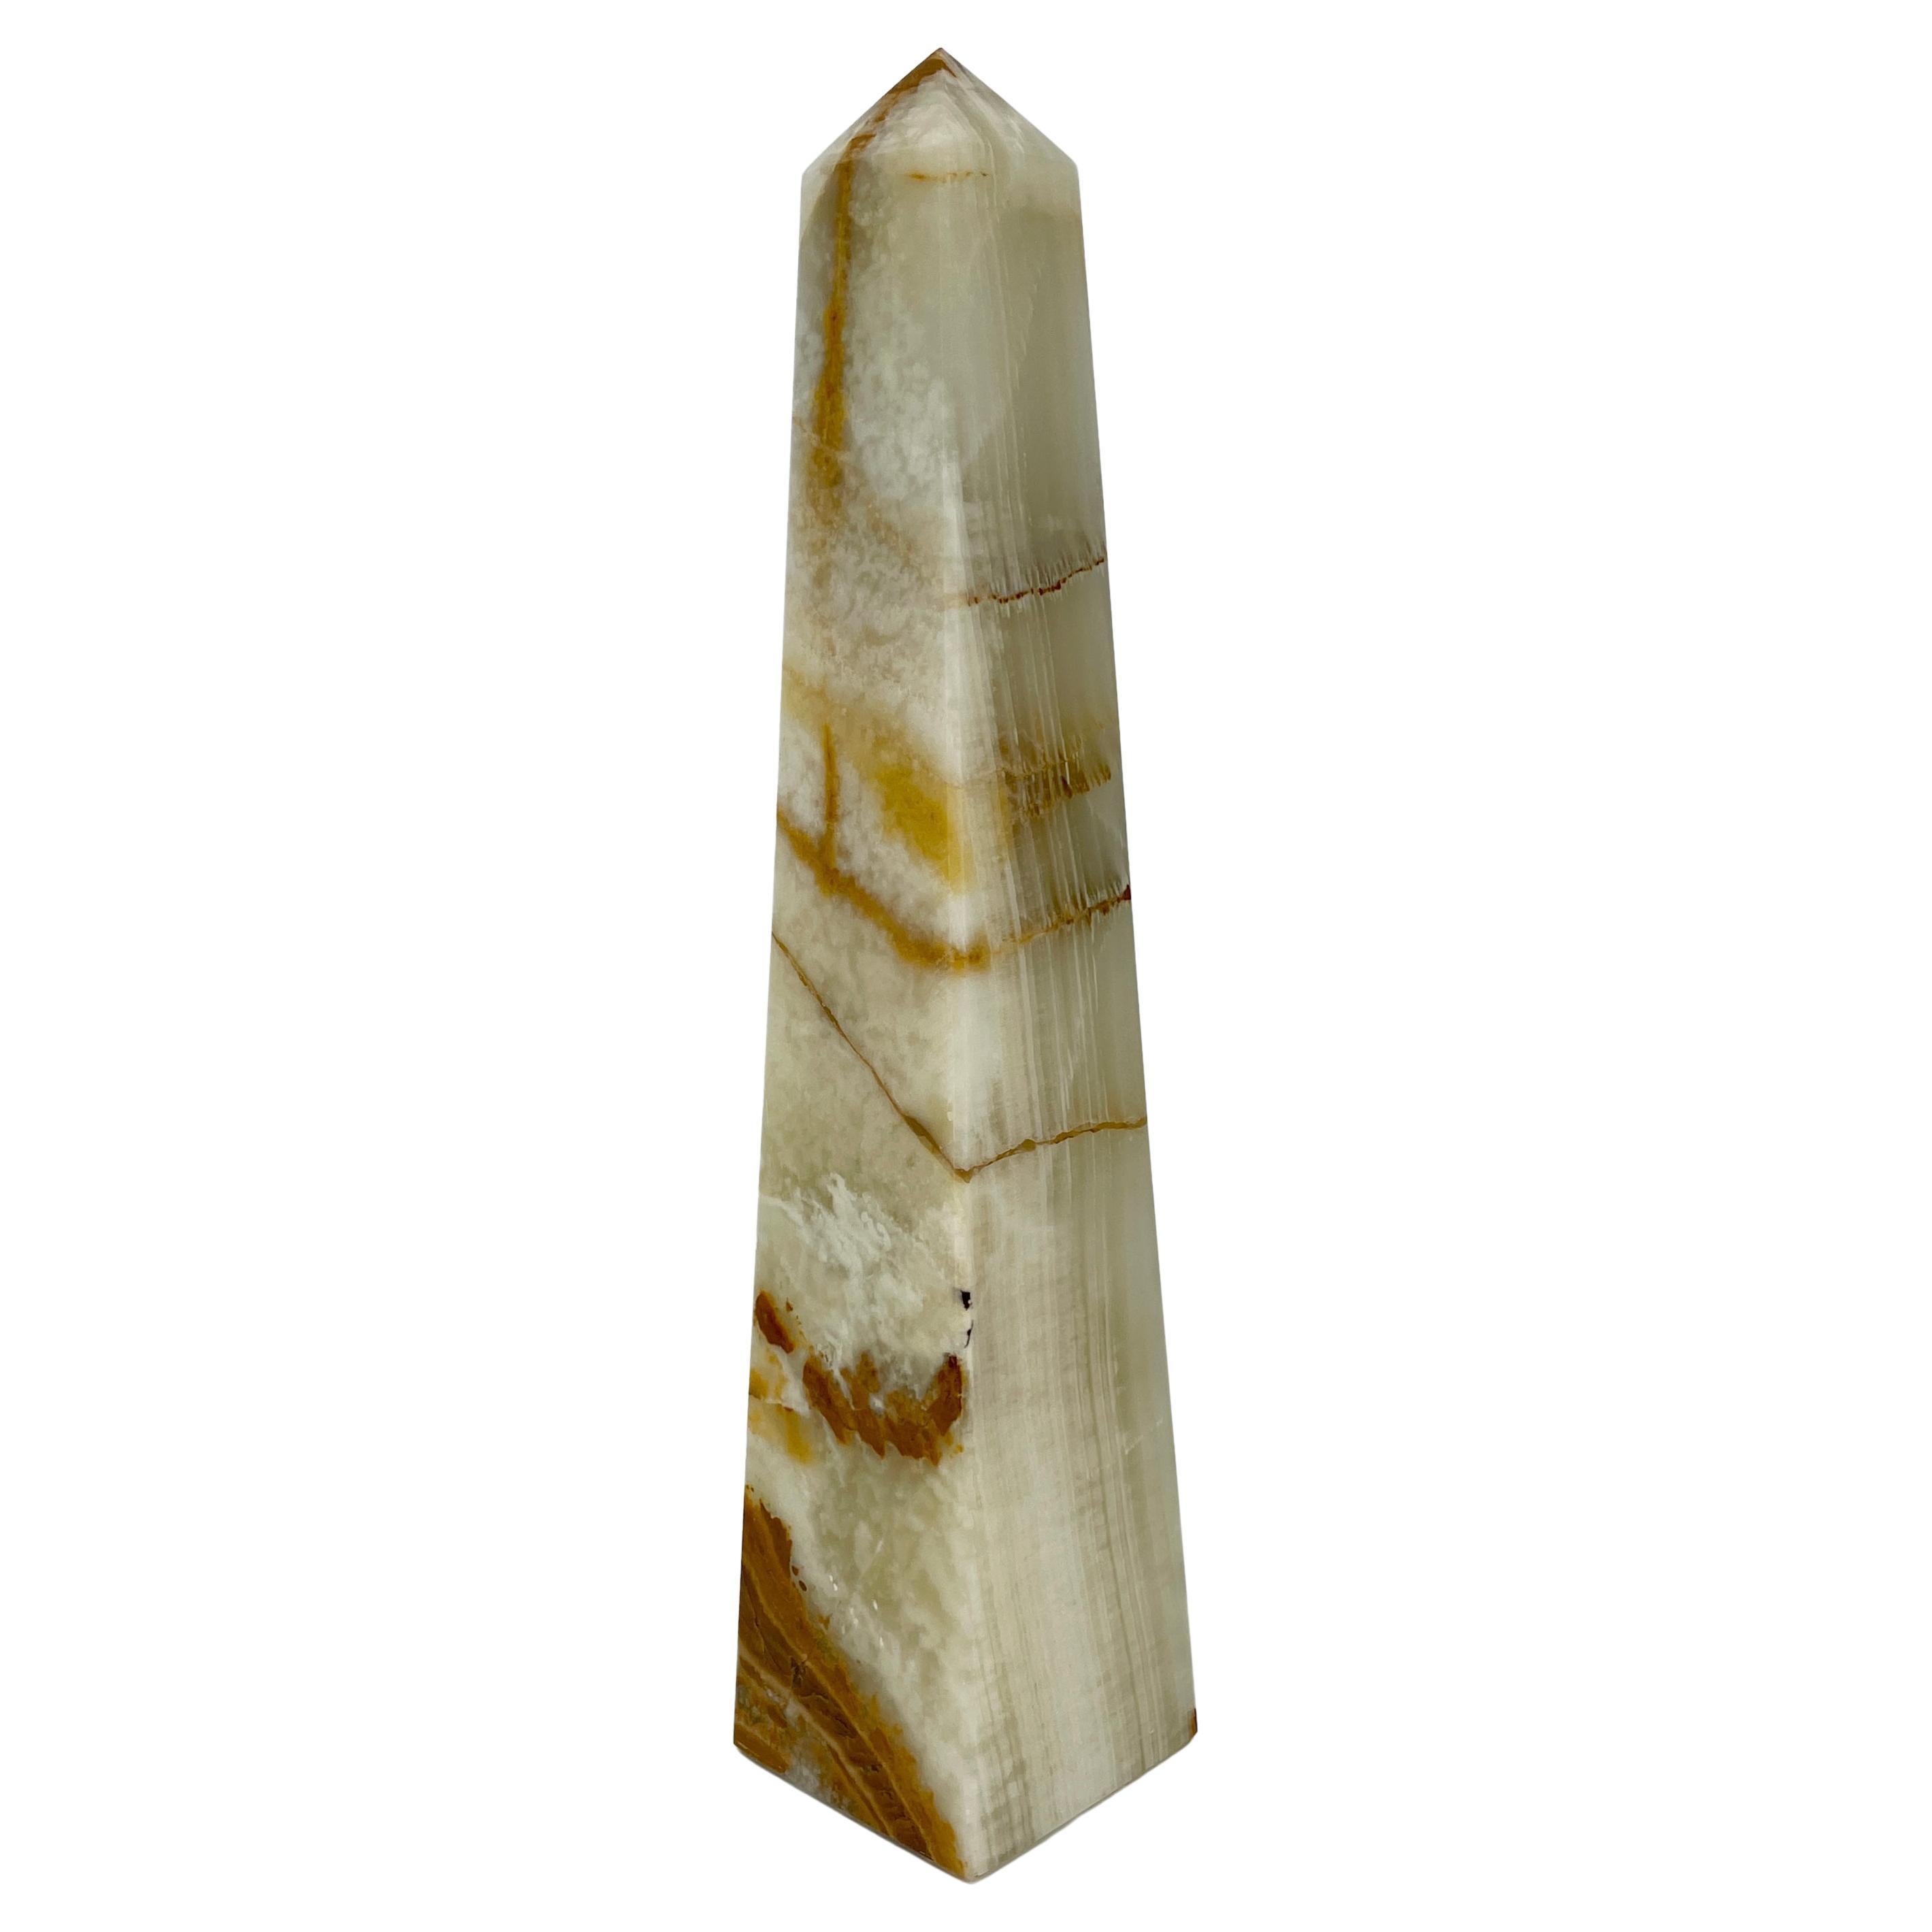 Modern green onyx obelisk, circa 1970's. This tall green or pistachio onyx obelisk is quite striking with deep burgundy veining throughout. The hand carved onyx sculpture is a modern accessory perfect for desk top, book shelf or anywhere in the home